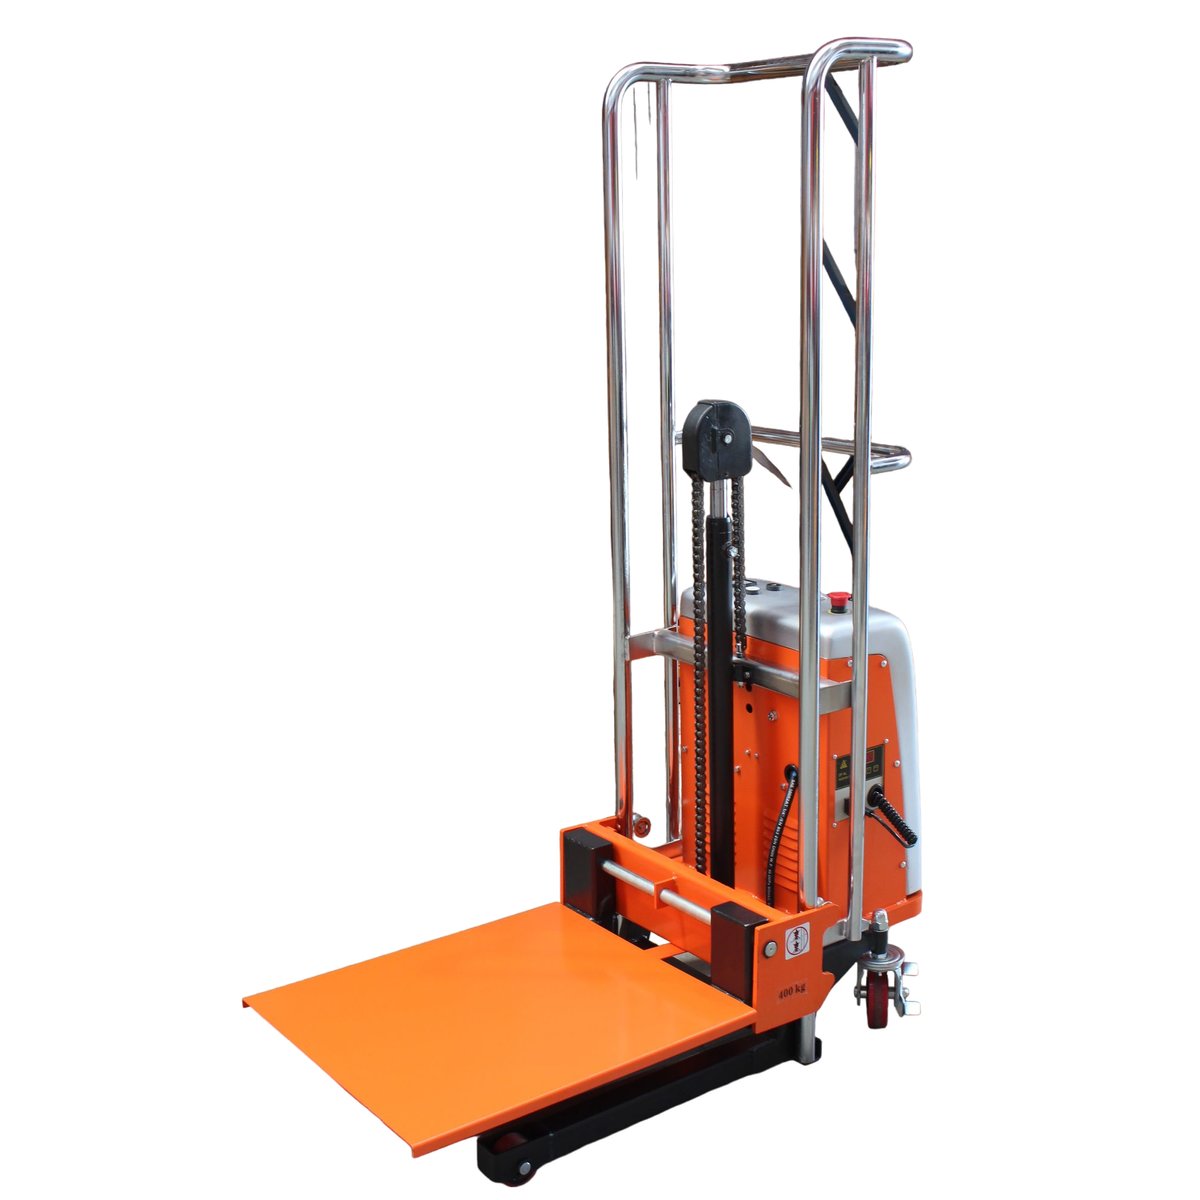 Buy Electric Platform Lifter 400kg in Utility Lifters | Materials Handling Lift Towers available at Astrolift NZ